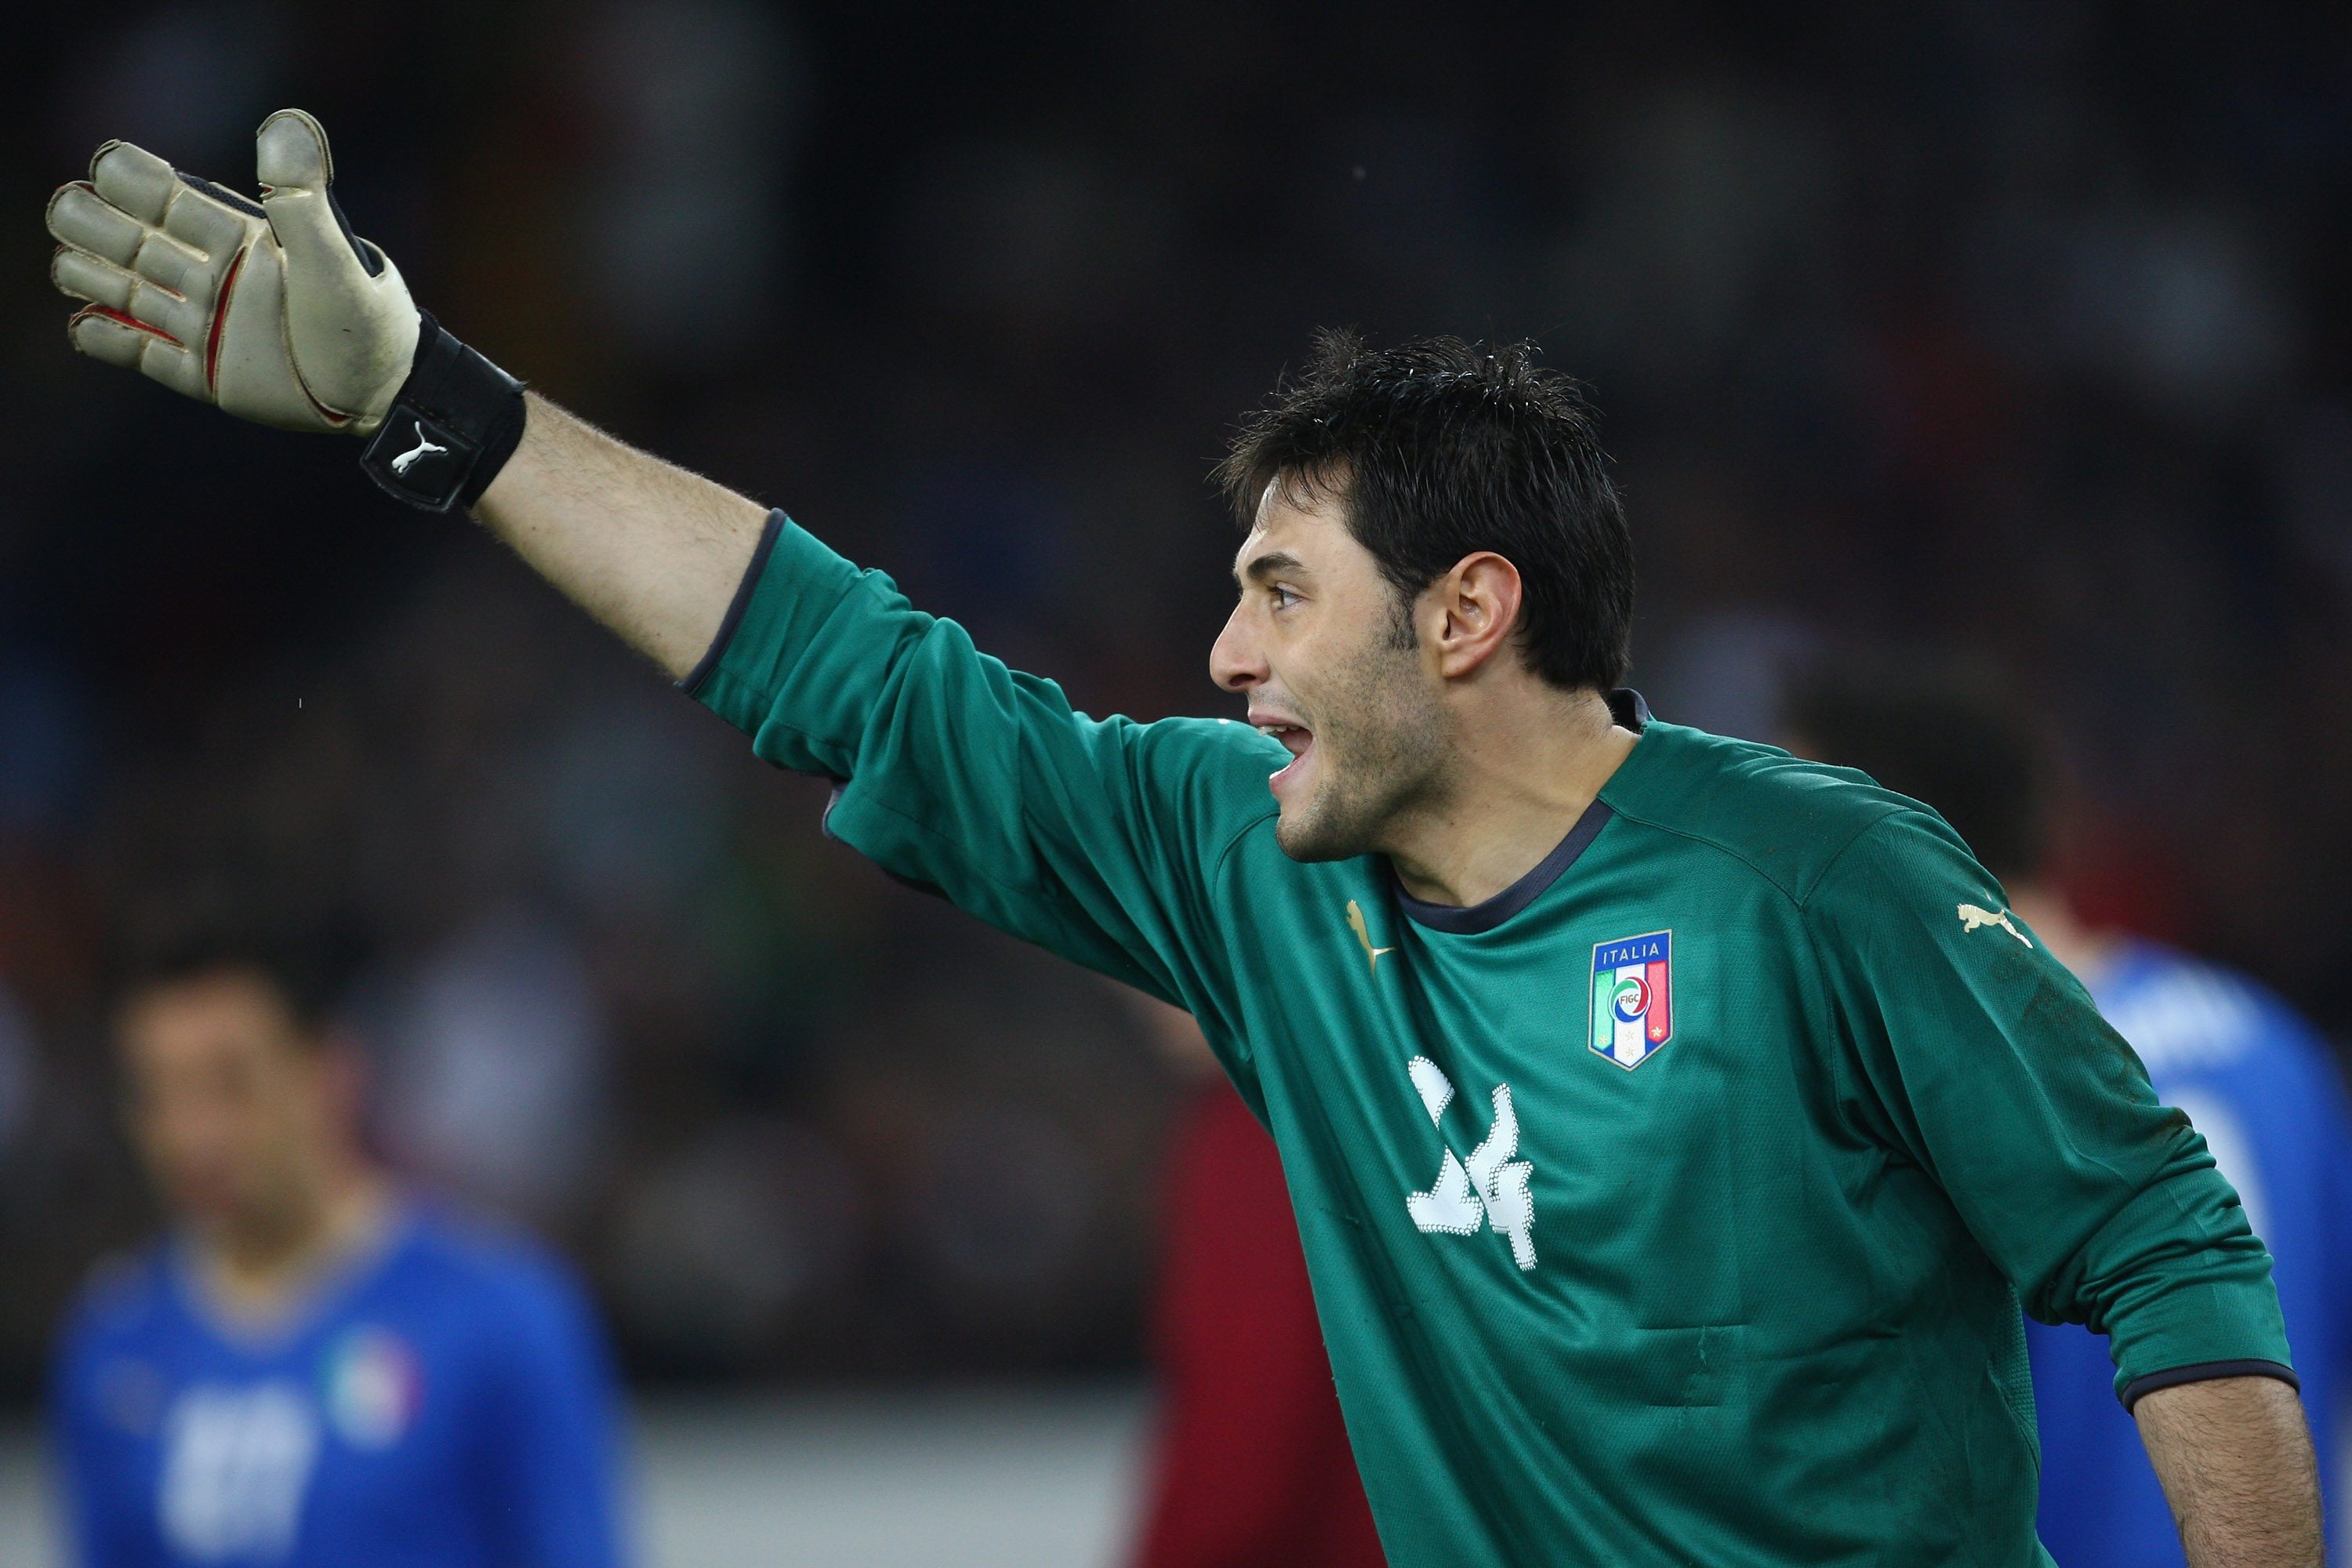 ZURICH, SWITZERLAND - FEBRUARY 06: Marco Amelia of Italy  is seen during  the International Friendly match between Italy and Portugal at the Letzigrund Stadium on February 6, 2008 in Zurich, Switzerland.  (Photo by Michael Steele/Getty Images)